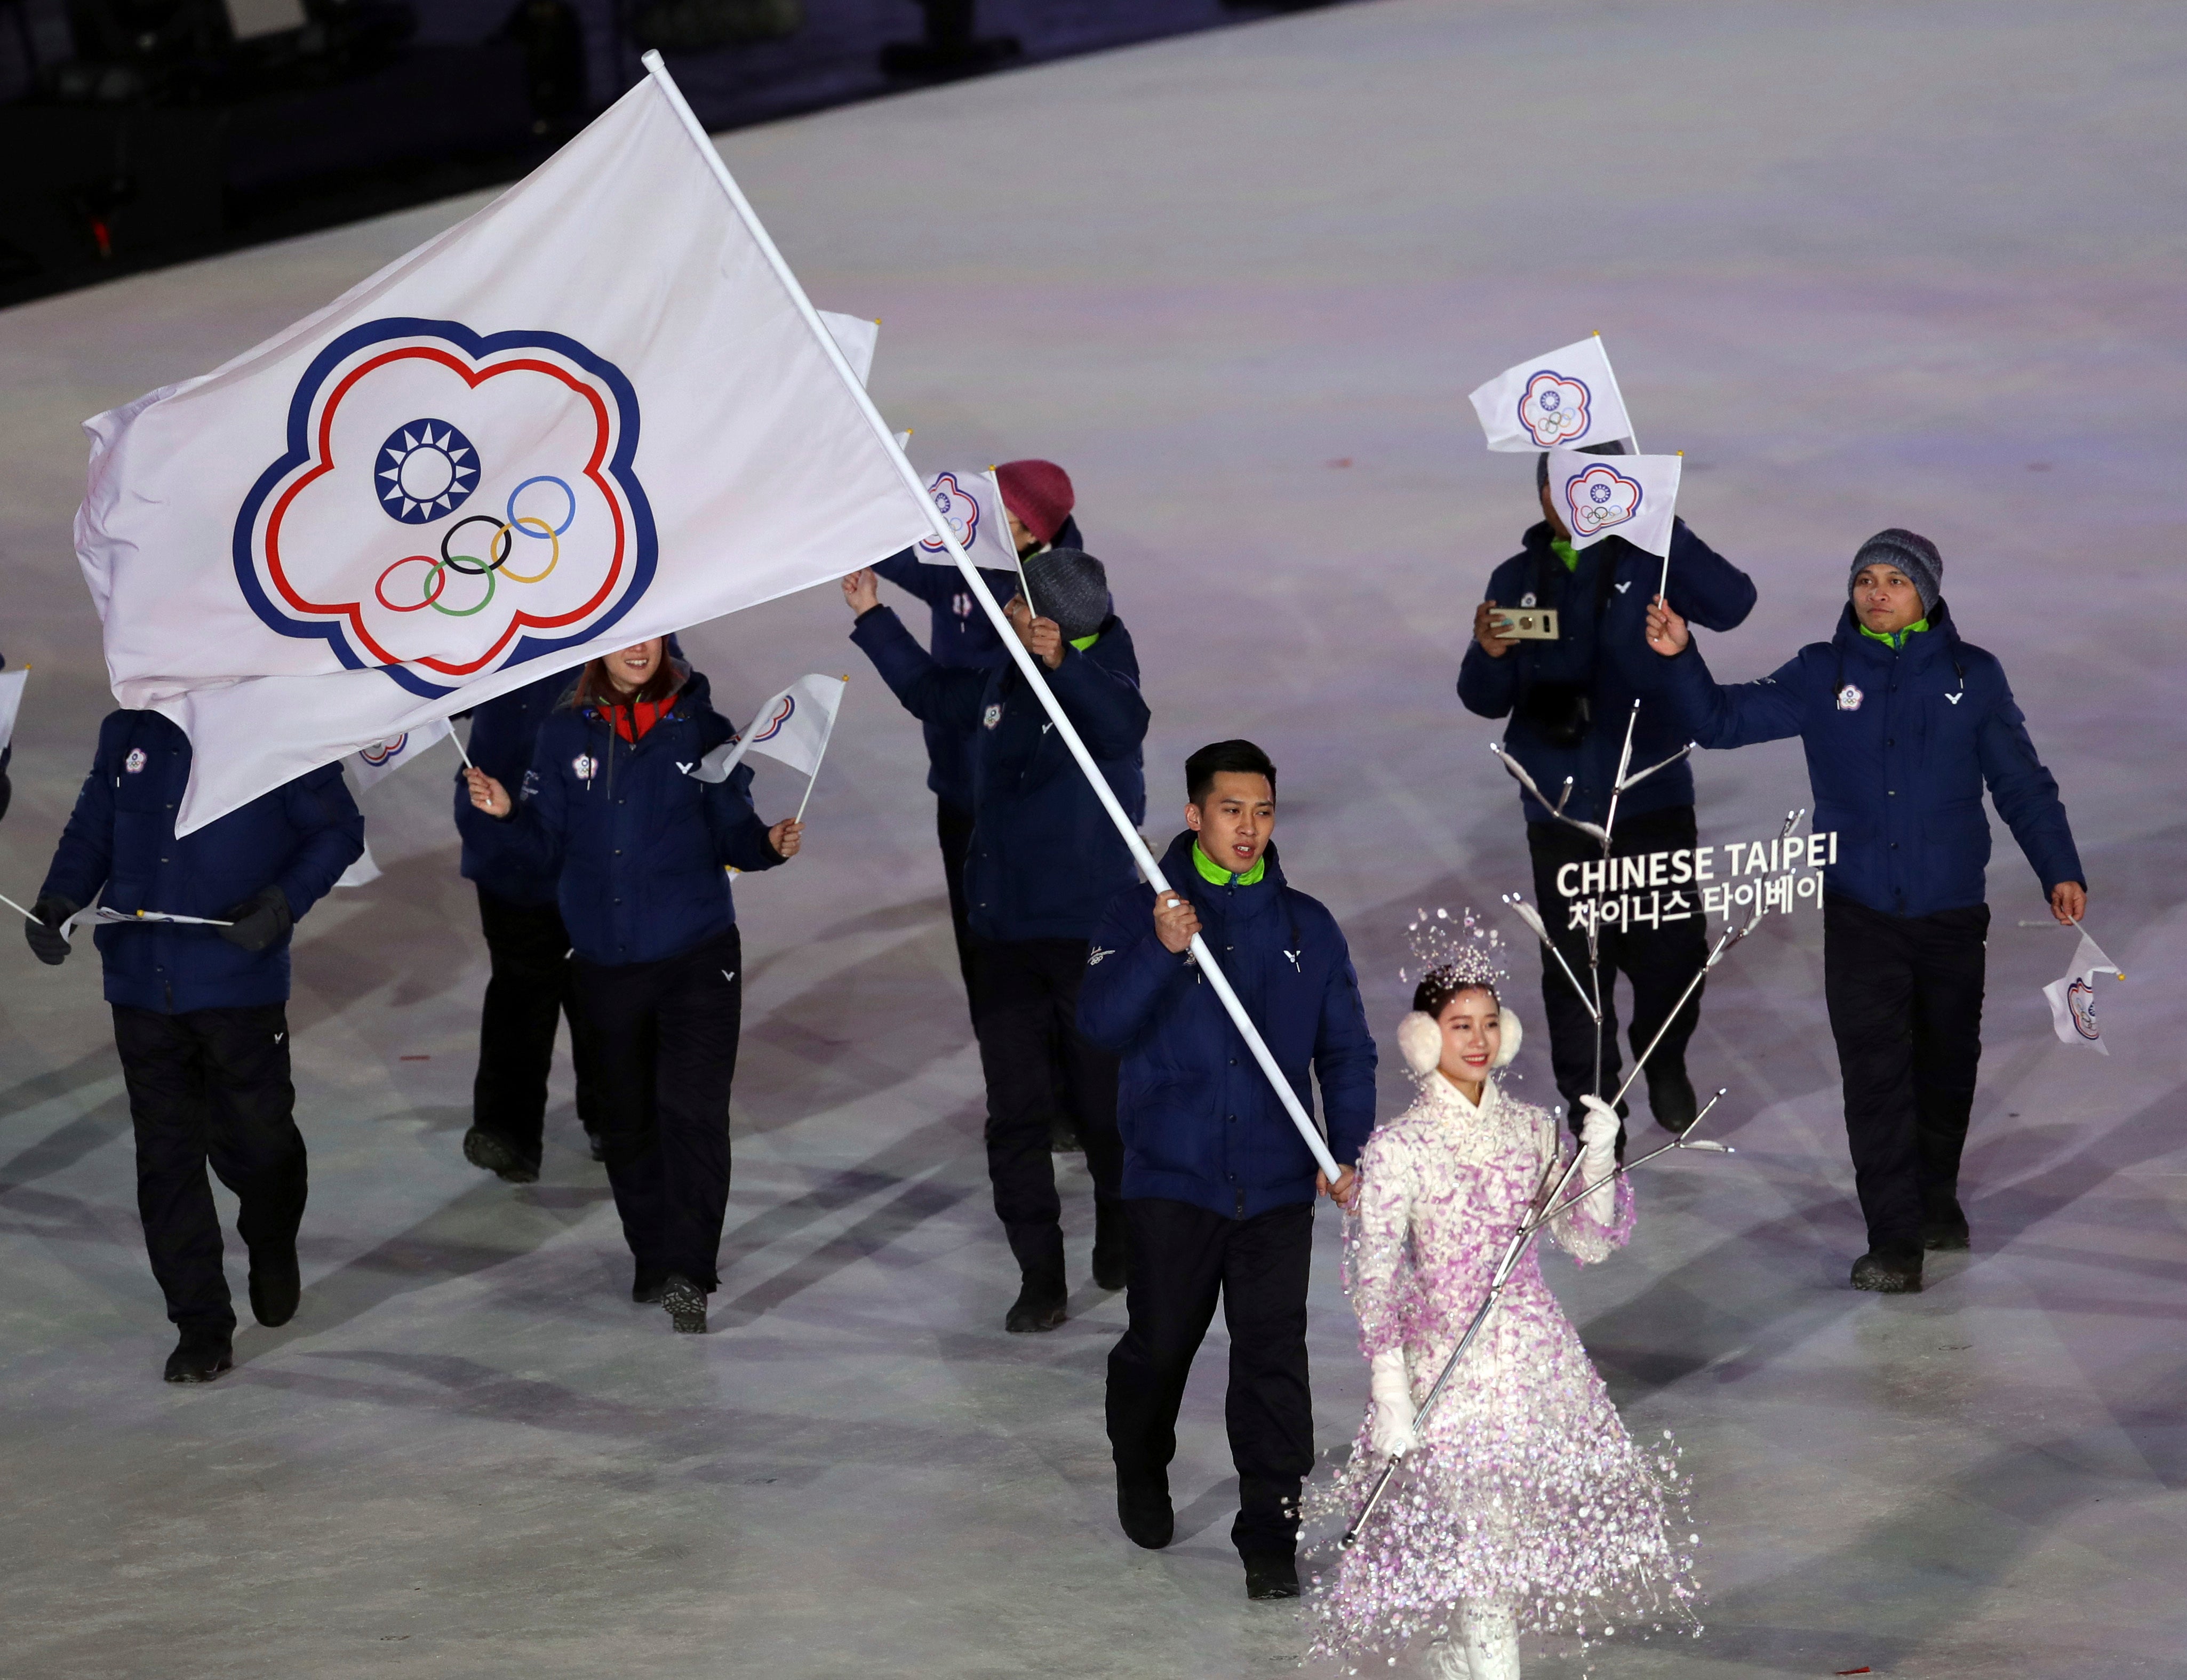 File photo: Taiwanese athletes carry flags during the opening ceremony of the 2018 Winter Olympics in Pyeongchang, South Korea, 9 February 2018